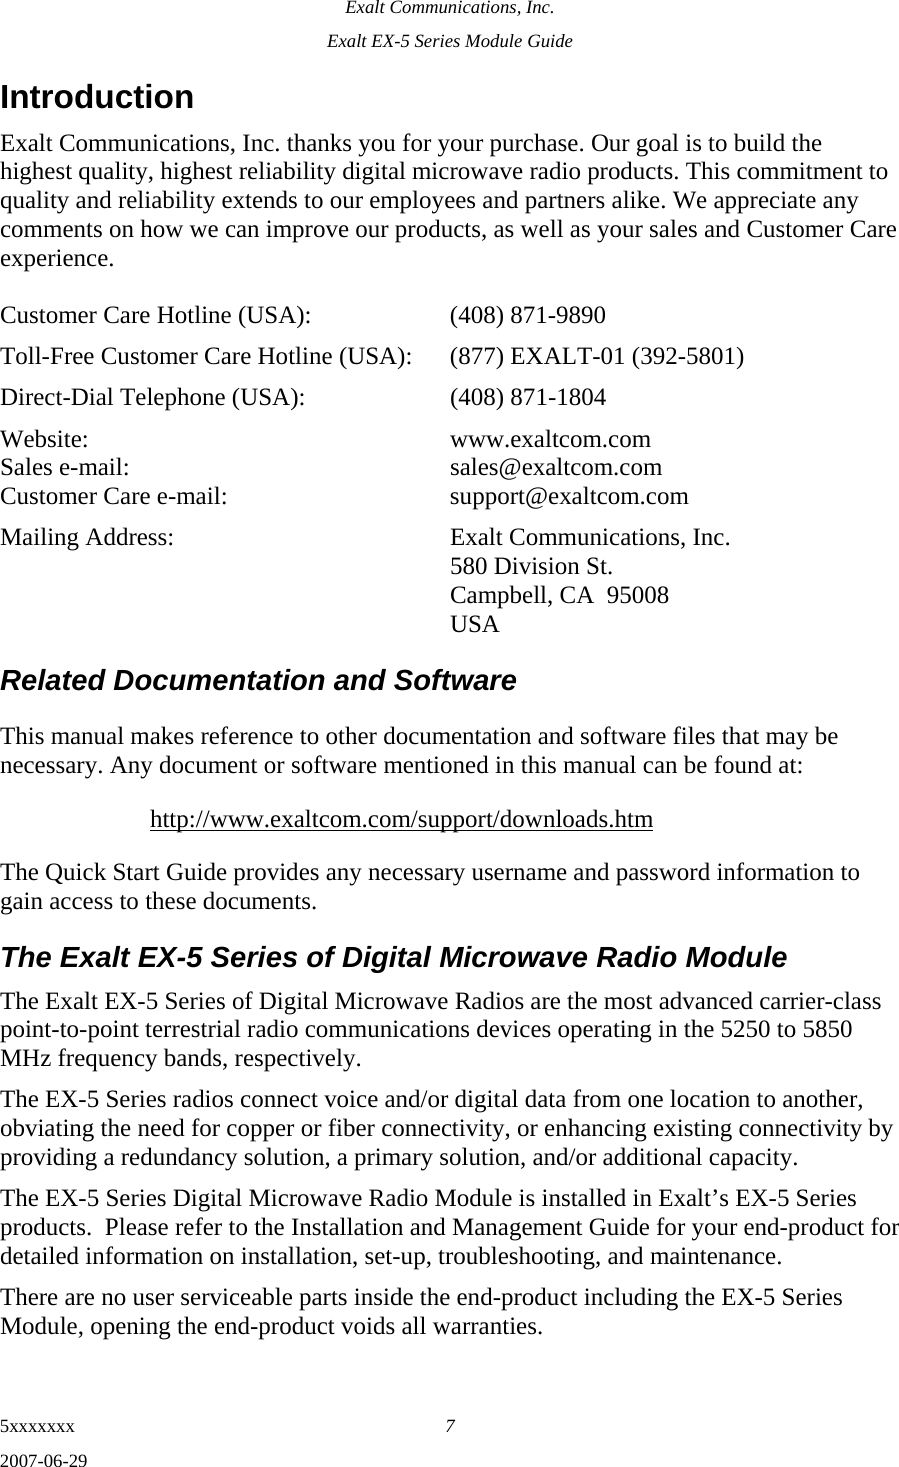 Exalt Communications, Inc. Exalt EX-5 Series Module Guide 5xxxxxxx  7 2007-06-29 Introduction Exalt Communications, Inc. thanks you for your purchase. Our goal is to build the highest quality, highest reliability digital microwave radio products. This commitment to quality and reliability extends to our employees and partners alike. We appreciate any comments on how we can improve our products, as well as your sales and Customer Care experience.  Customer Care Hotline (USA):    (408) 871-9890 Toll-Free Customer Care Hotline (USA):  (877) EXALT-01 (392-5801) Direct-Dial Telephone (USA):    (408) 871-1804 Website:  www.exaltcom.com Sales e-mail:    sales@exaltcom.com Customer Care e-mail:    support@exaltcom.com Mailing Address:    Exalt Communications, Inc.     580 Division St.     Campbell, CA  95008   USA Related Documentation and Software This manual makes reference to other documentation and software files that may be necessary. Any document or software mentioned in this manual can be found at: http://www.exaltcom.com/support/downloads.htm The Quick Start Guide provides any necessary username and password information to gain access to these documents. The Exalt EX-5 Series of Digital Microwave Radio Module The Exalt EX-5 Series of Digital Microwave Radios are the most advanced carrier-class point-to-point terrestrial radio communications devices operating in the 5250 to 5850 MHz frequency bands, respectively. The EX-5 Series radios connect voice and/or digital data from one location to another, obviating the need for copper or fiber connectivity, or enhancing existing connectivity by providing a redundancy solution, a primary solution, and/or additional capacity. The EX-5 Series Digital Microwave Radio Module is installed in Exalt’s EX-5 Series products.  Please refer to the Installation and Management Guide for your end-product for detailed information on installation, set-up, troubleshooting, and maintenance. There are no user serviceable parts inside the end-product including the EX-5 Series Module, opening the end-product voids all warranties.   